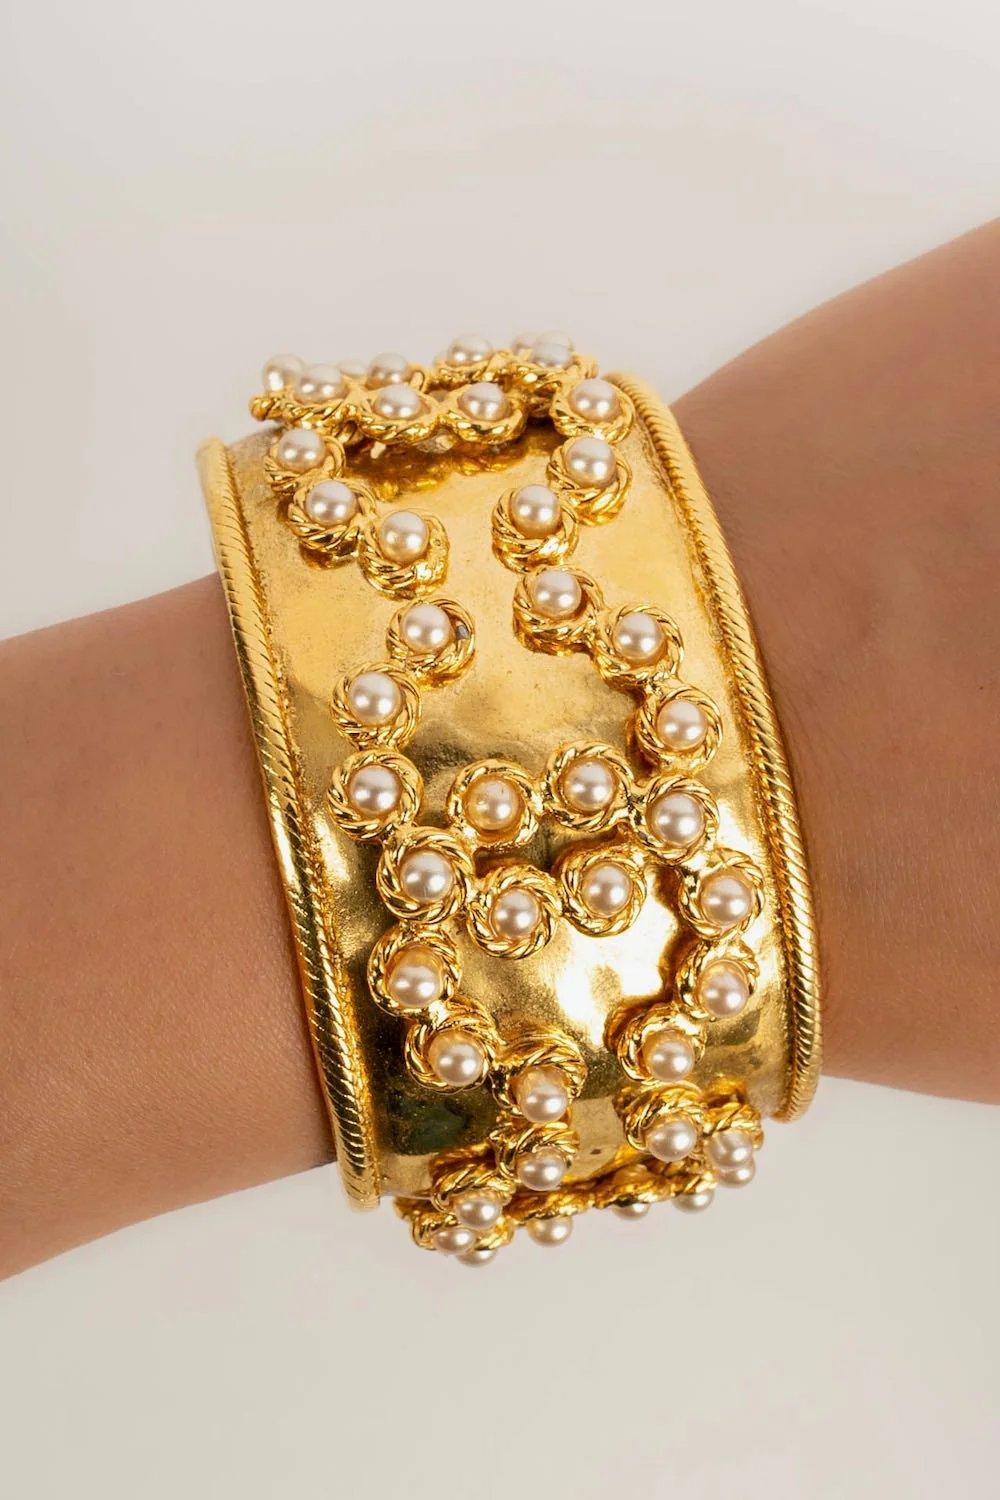 Chanel Cuff Bracelet in Gilded Metal and Cabochons For Sale 4